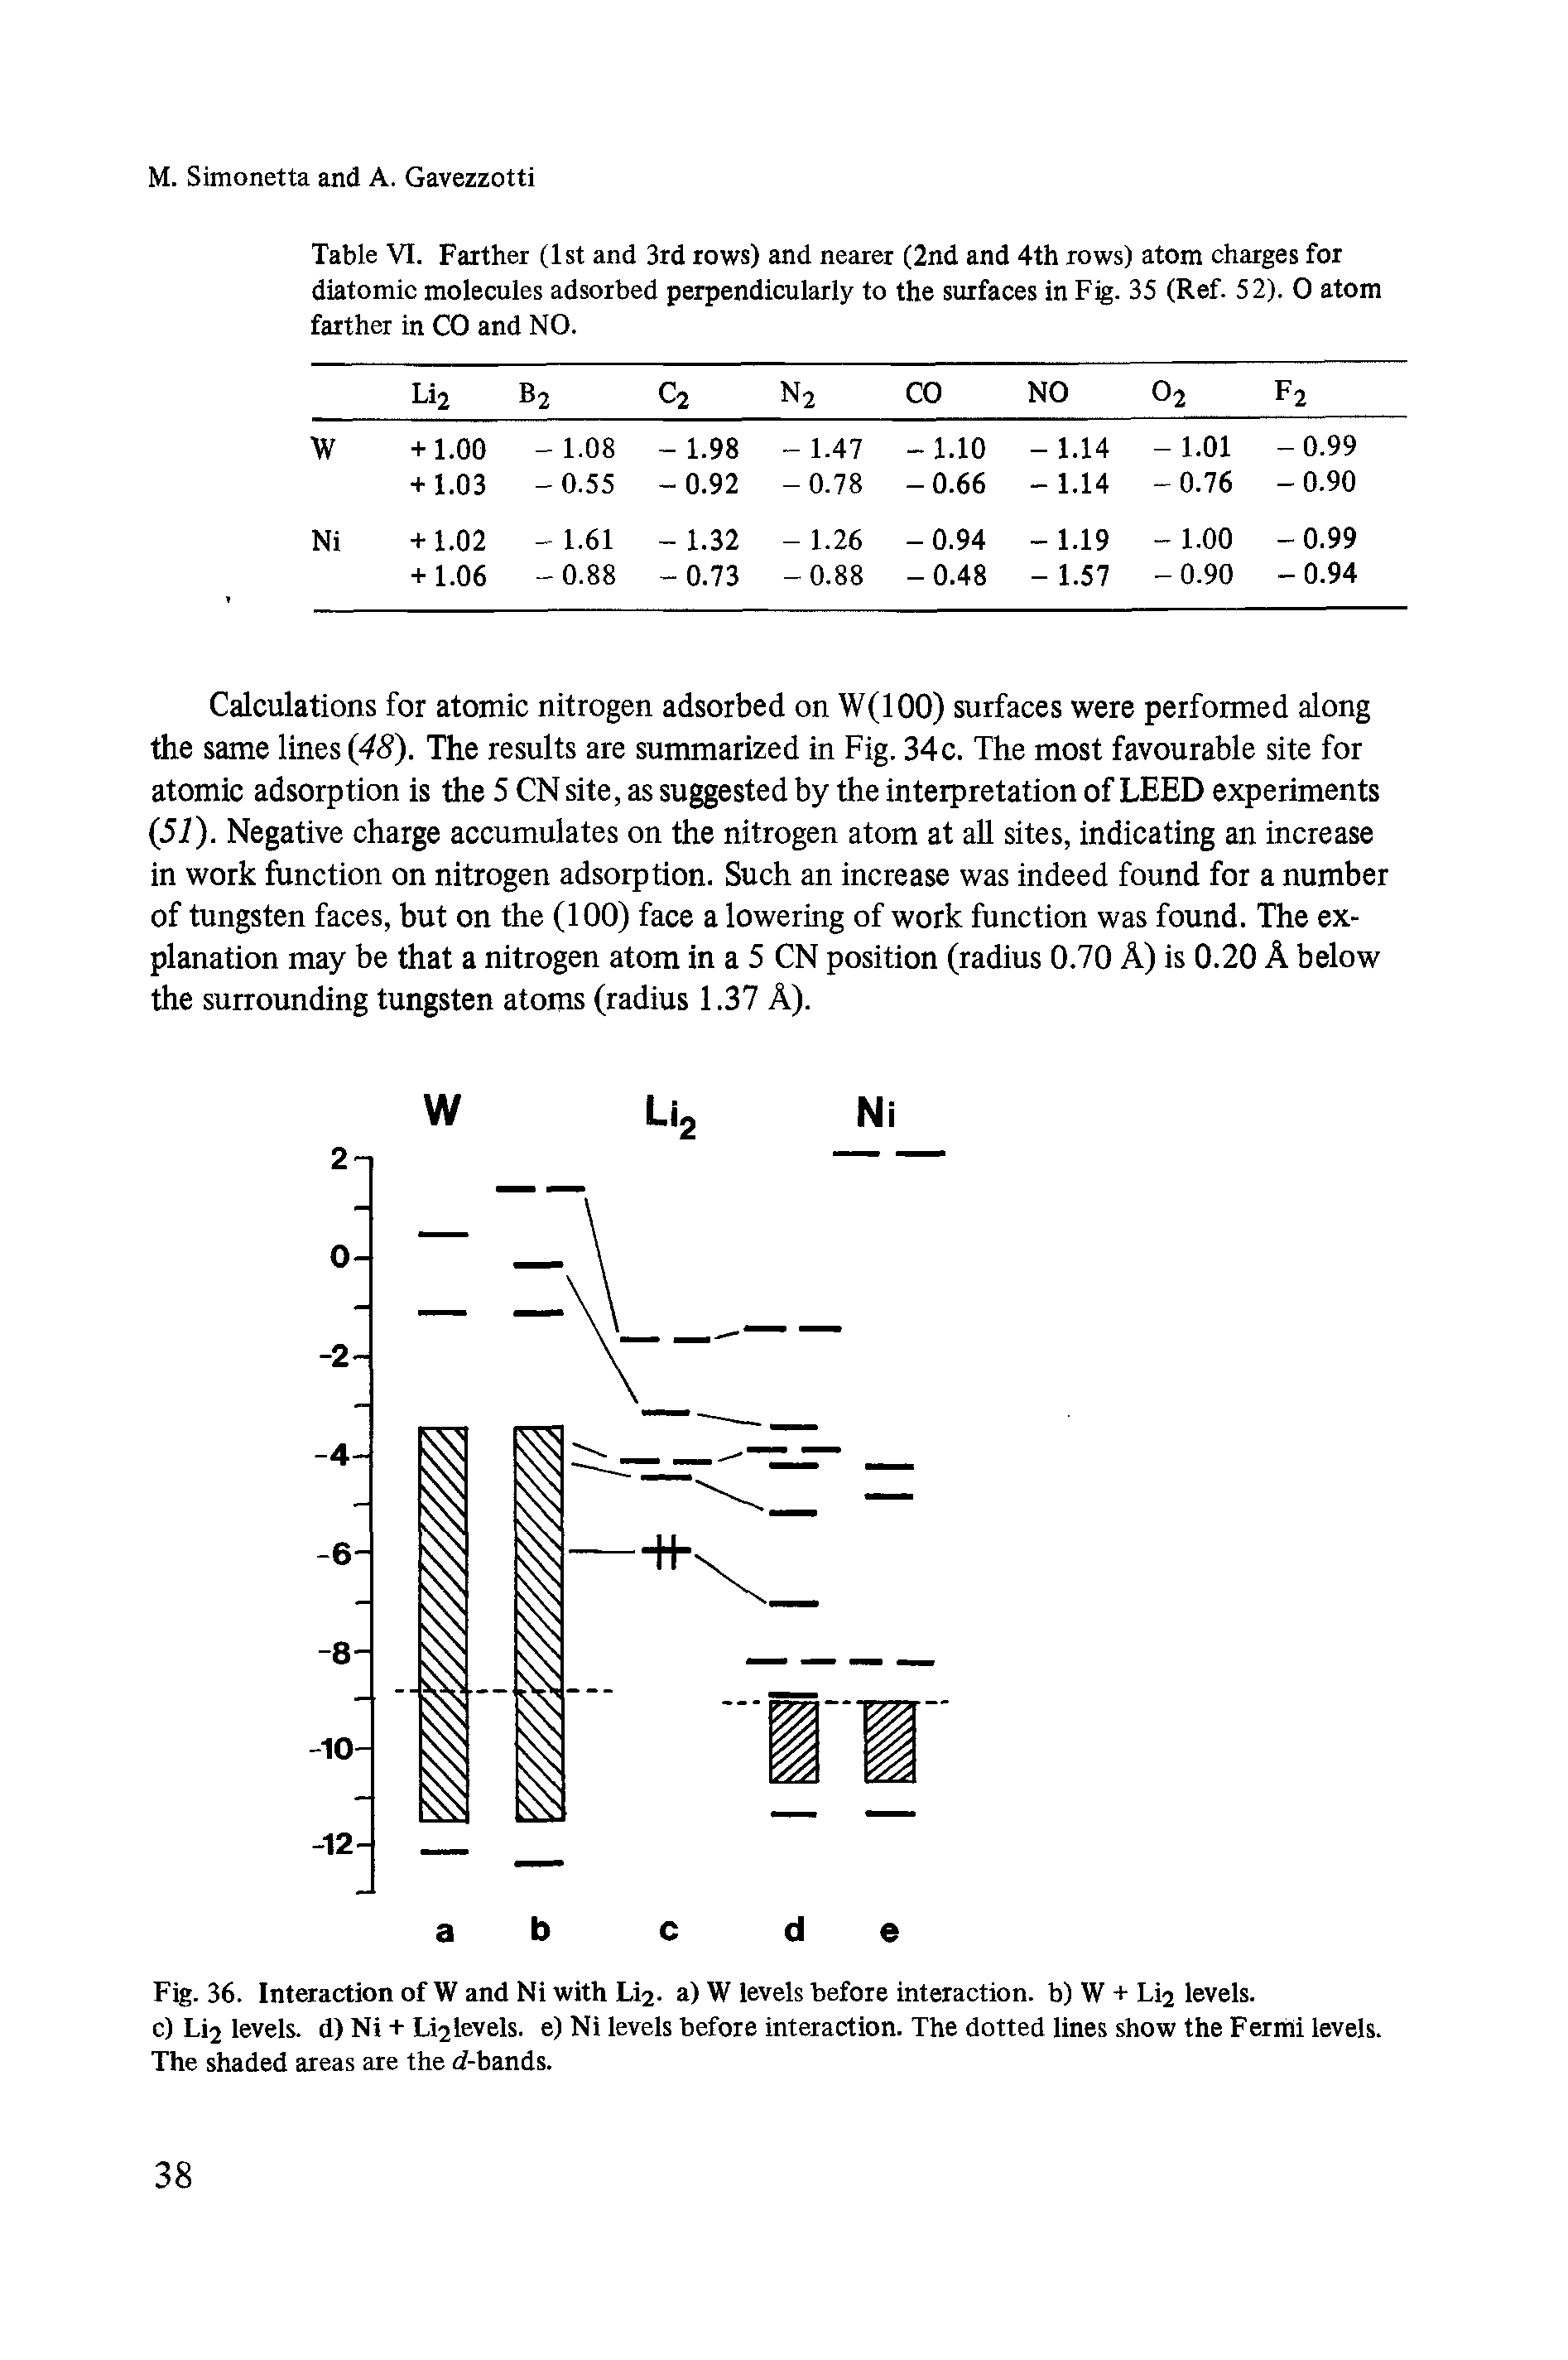 Table VI. Farther (1st and 3rd rows) and nearer (2nd and 4th rows) atom charges for diatomic molecules adsorbed perpendicularly to the surfaces in Fig. 35 (Ref. 52). 0 atom farther in CO and NO.